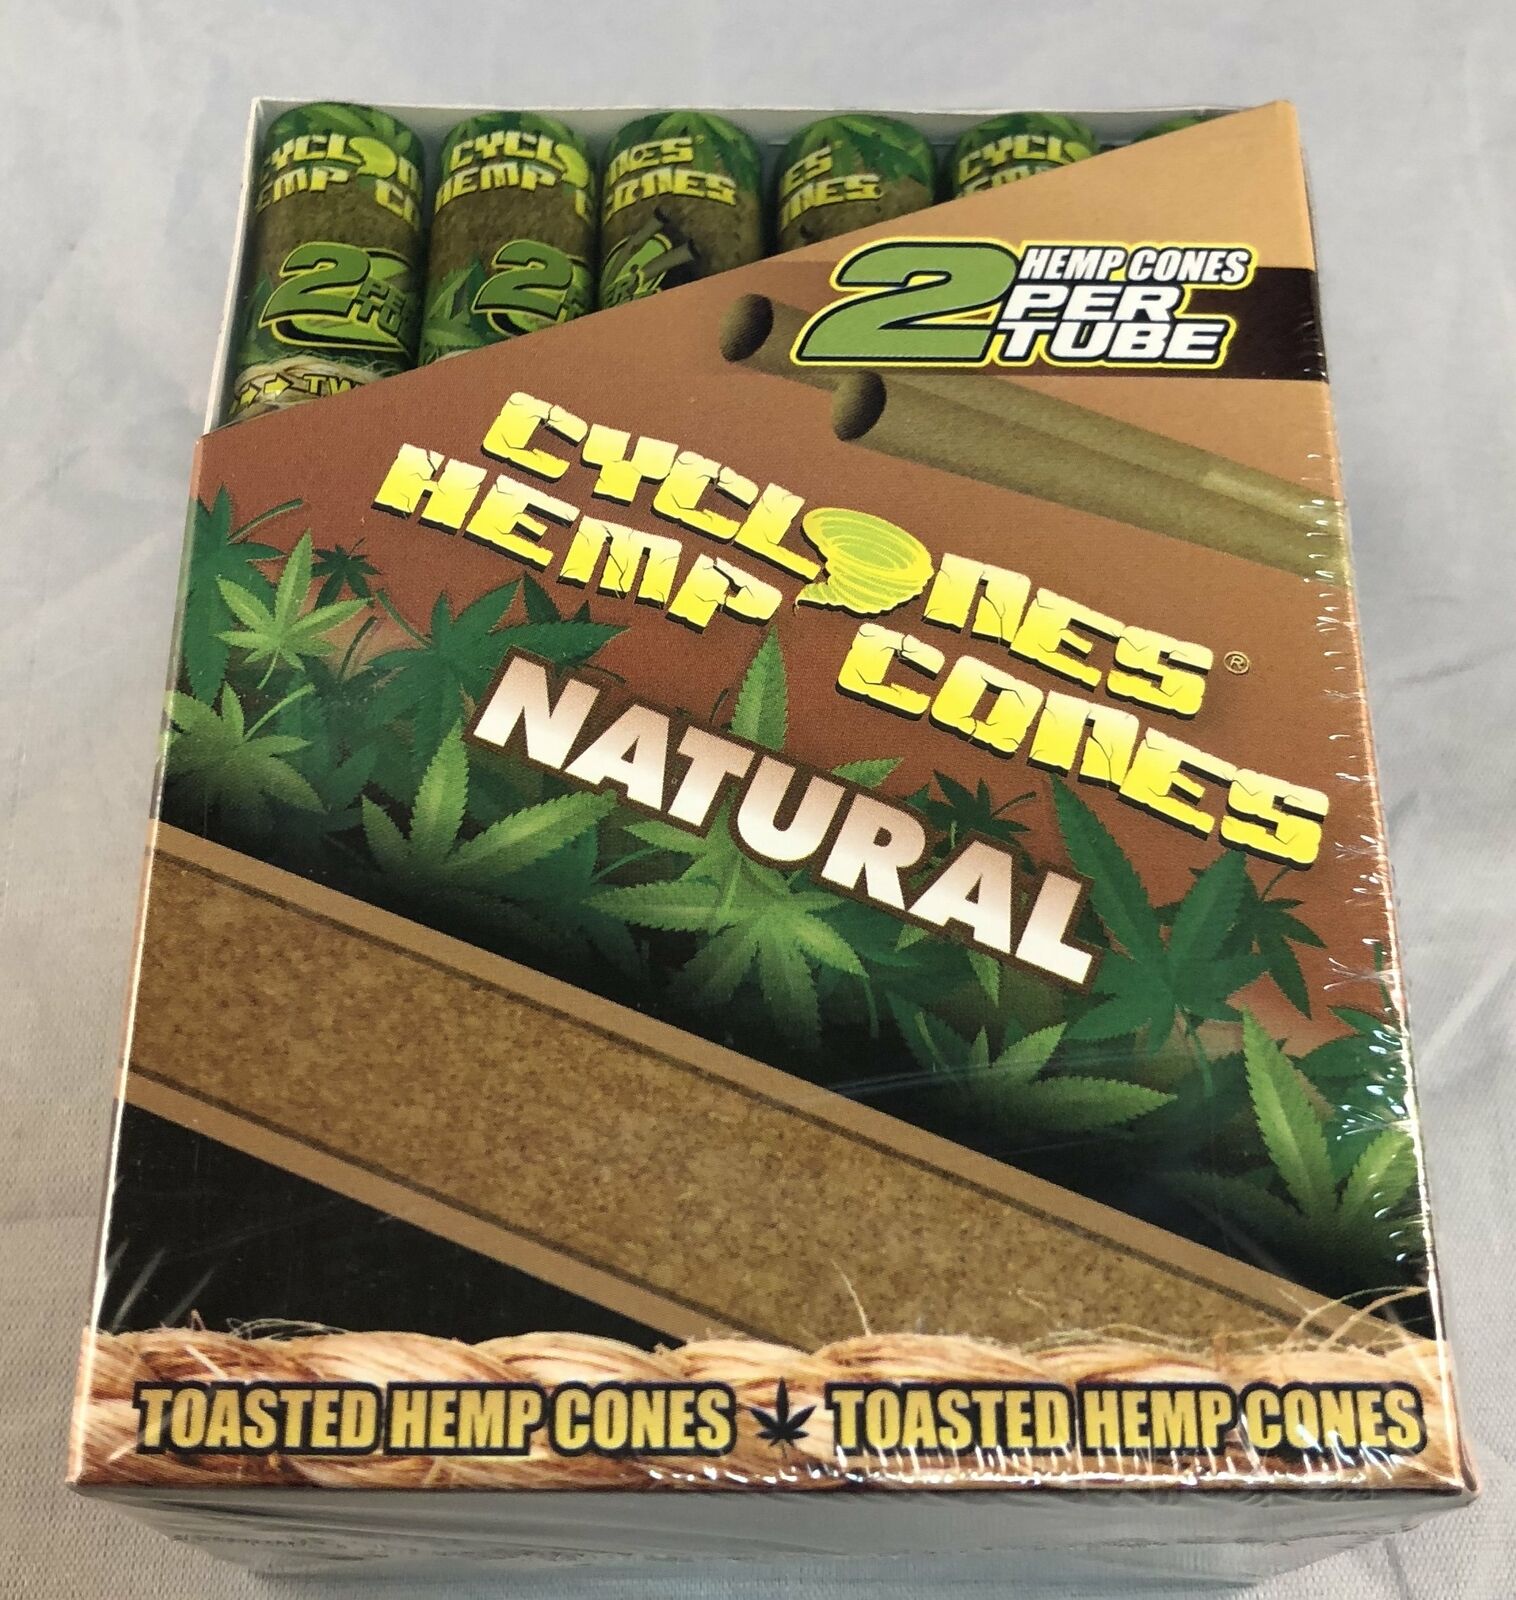 FREE GIFTS🎁Cyclones🌪Natural 48 High🥳Quality Toasted Hemp🍁Cones🍦24 Tubes🔥💨